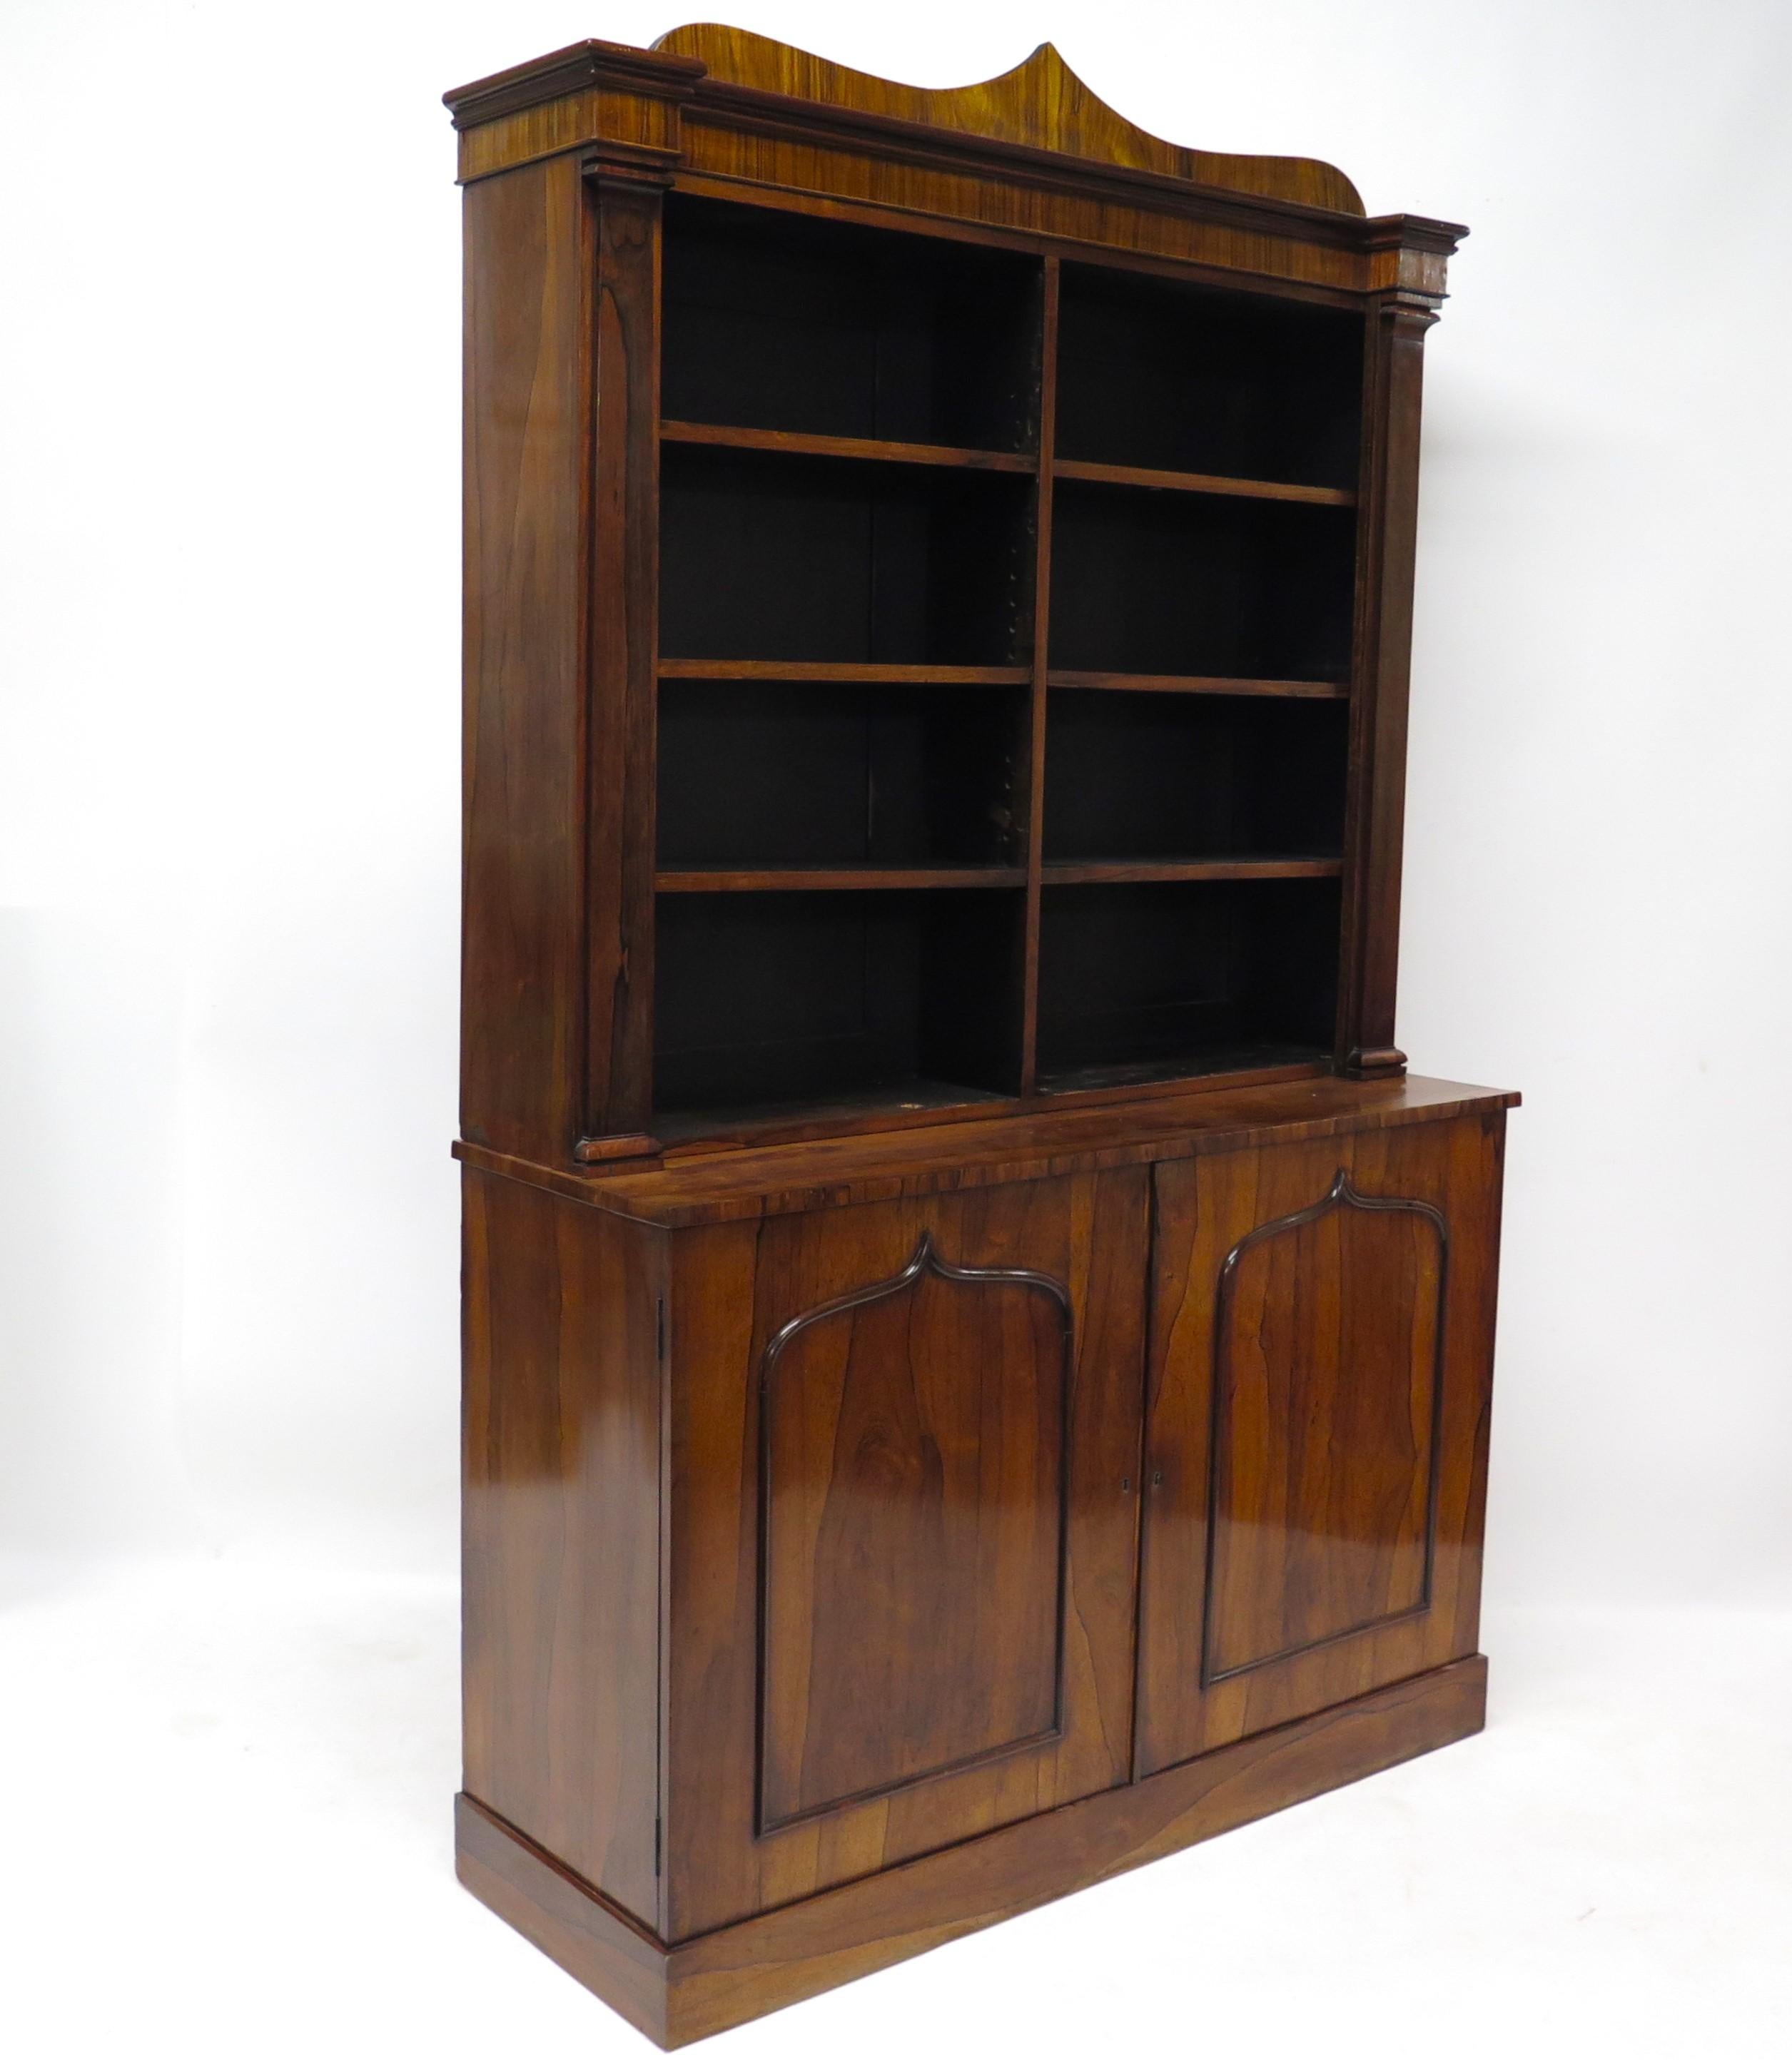 an English Regency rosewood bookcase with shelves at the top and two doors at the bottom, curved top with point in center, trim on doors echoes it, pilasters at sides of top portion. England. Circa 1820.

( TWO AVAILABLE )  

MEASUREMENTS:

86